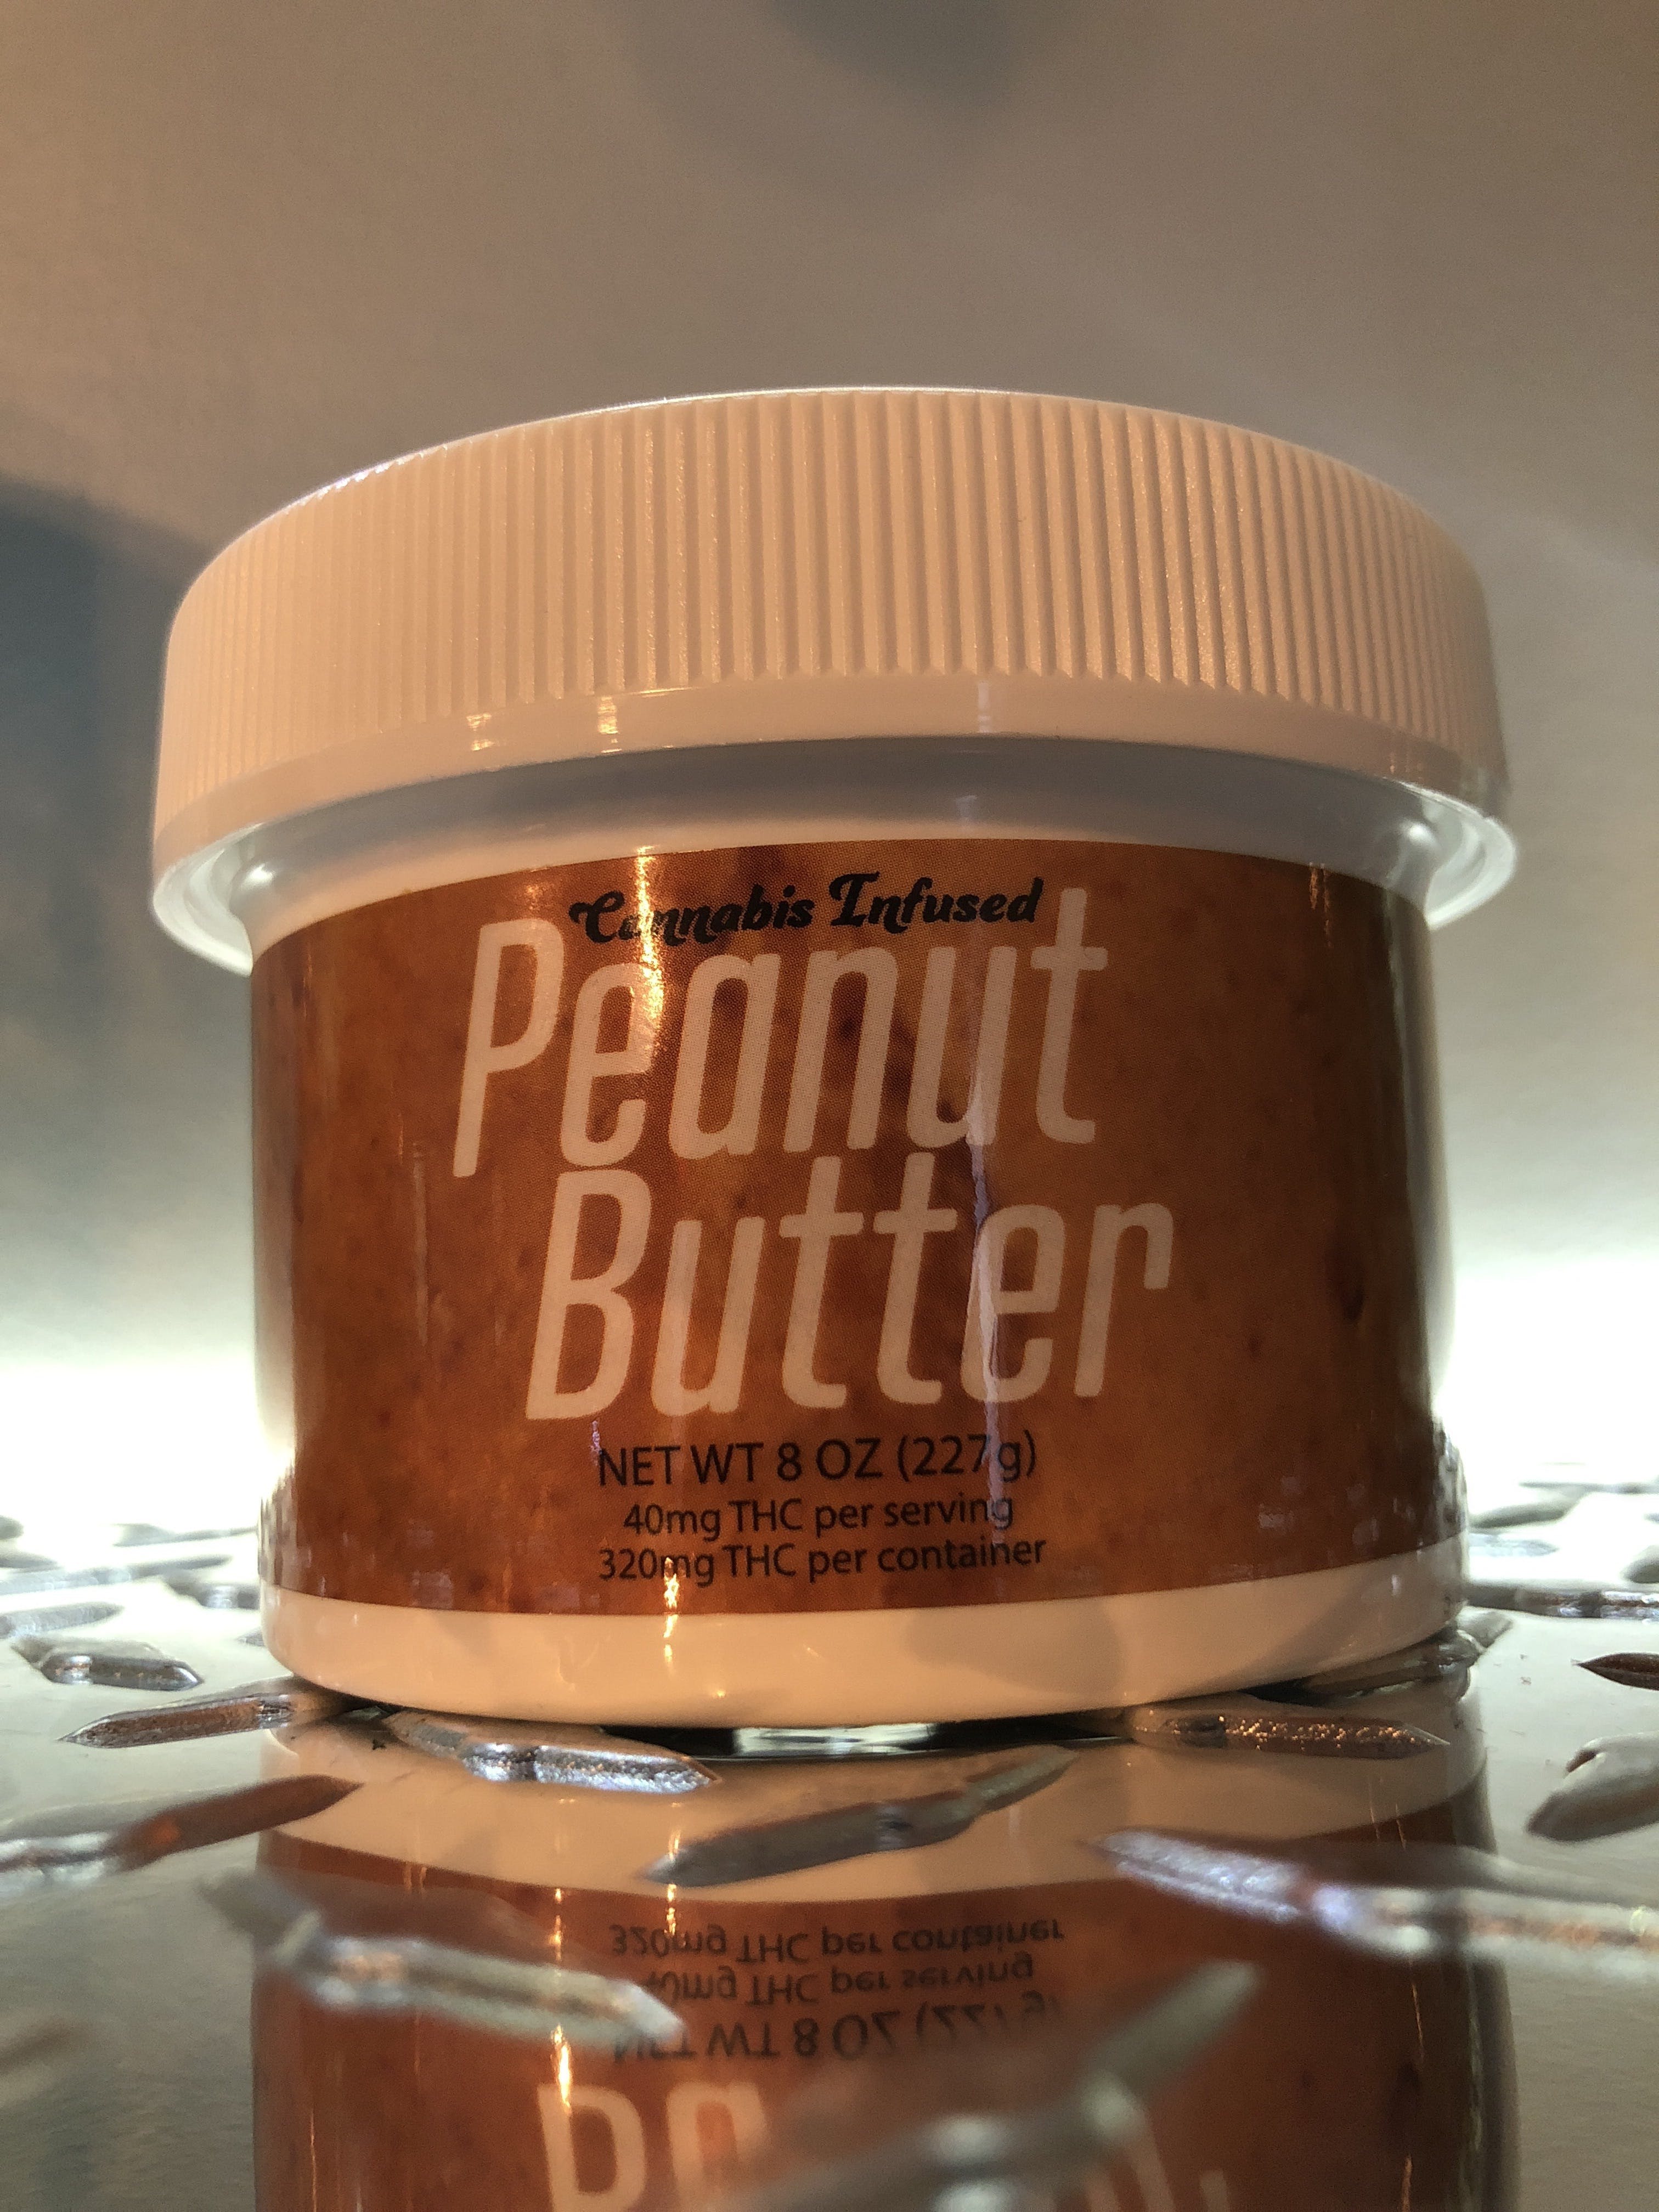 edible-detroit-fudge-co-320mg-thc-infused-peanut-butter